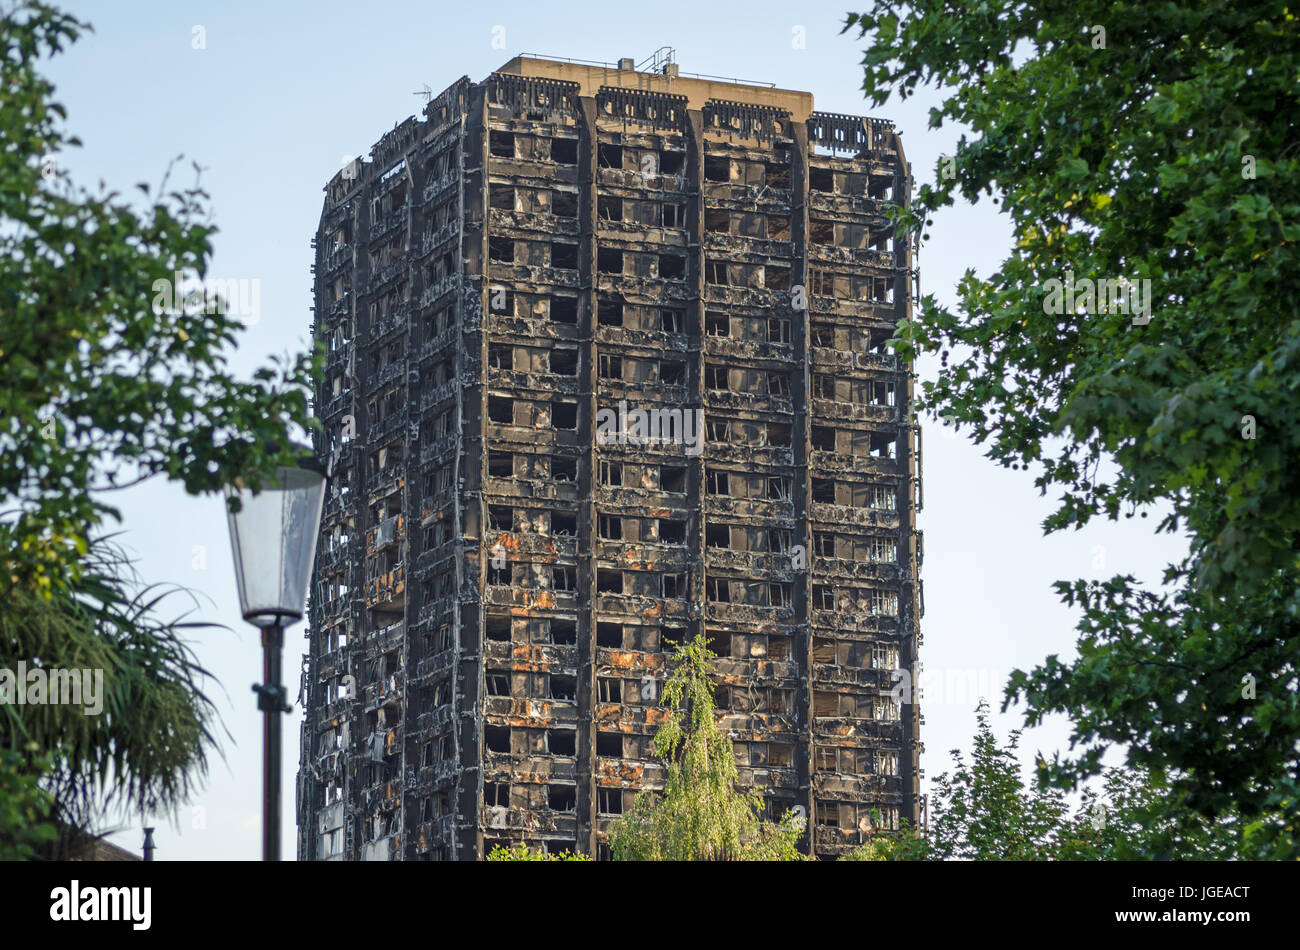 Charred remains of the Grenfell Tower block of council flats in which at least 80 people are feared to have died in a fire, Kensington, West London. Stock Photo